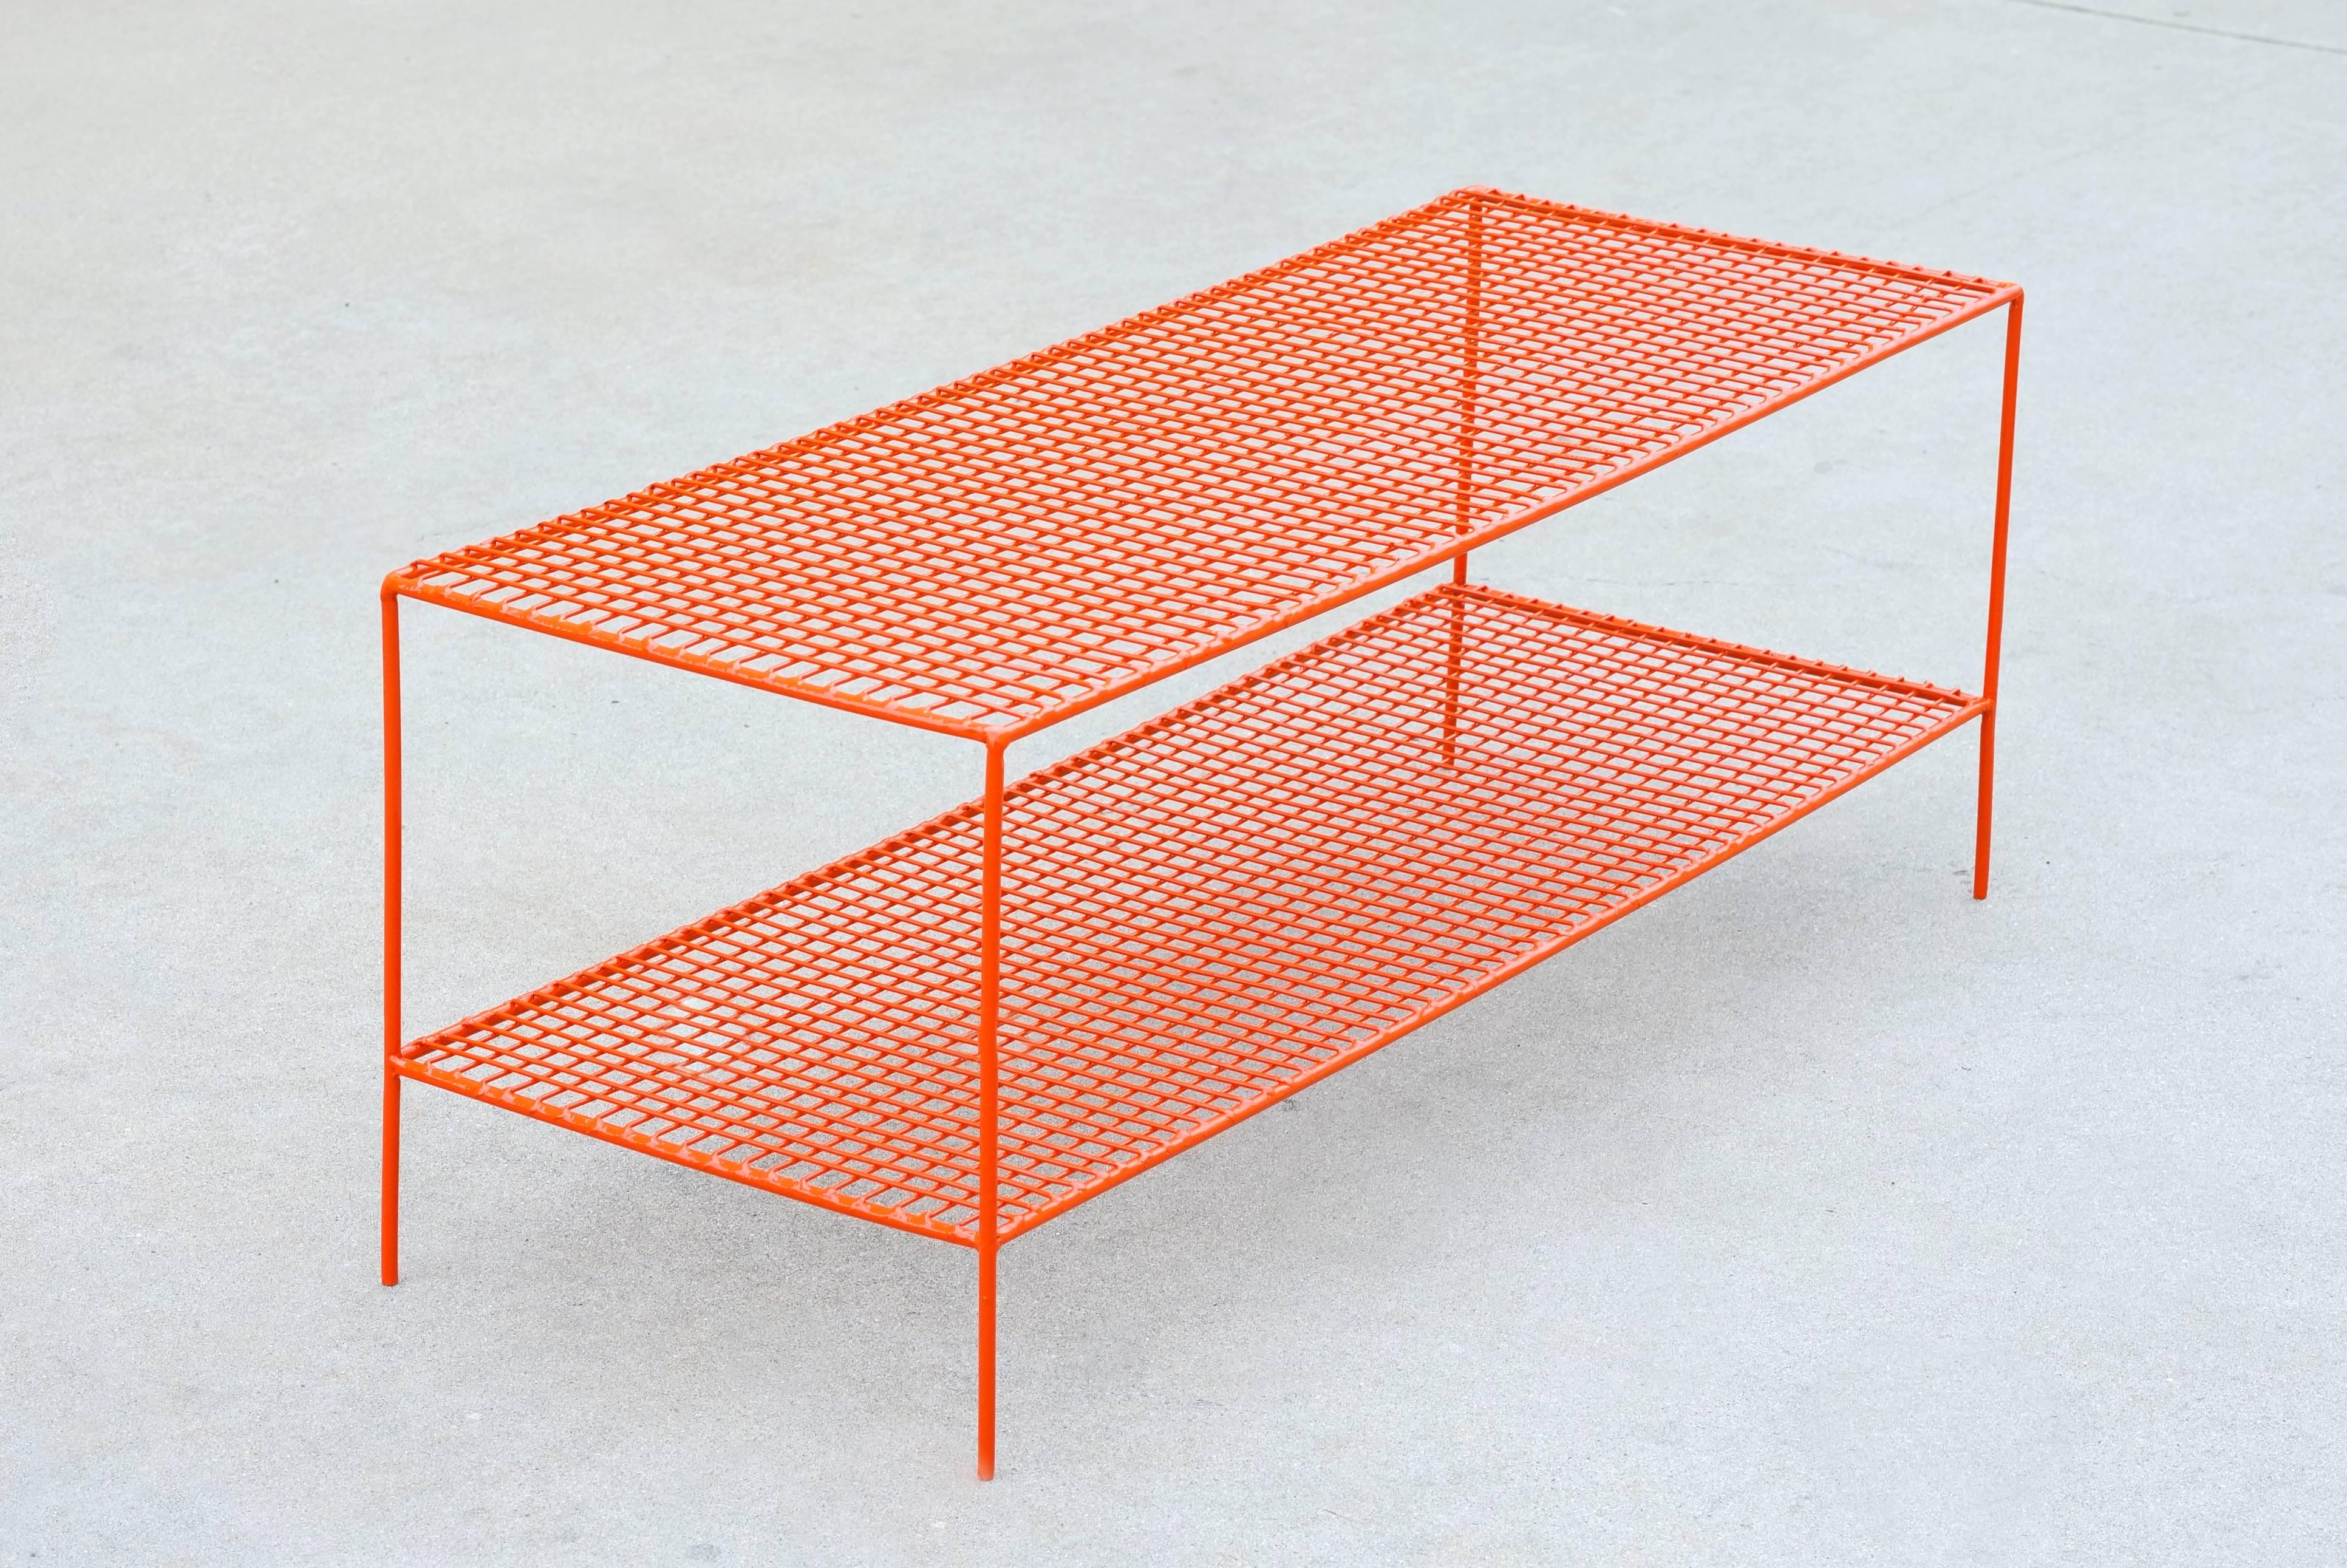 Our retro shoe rack has a modern flare with its grid shelf design. Composed of steel and refinished in high gloss orange powder coat. This modular piece is ideal for retail display or put it to use as a storage unit in your home. 

Dimensions: 14